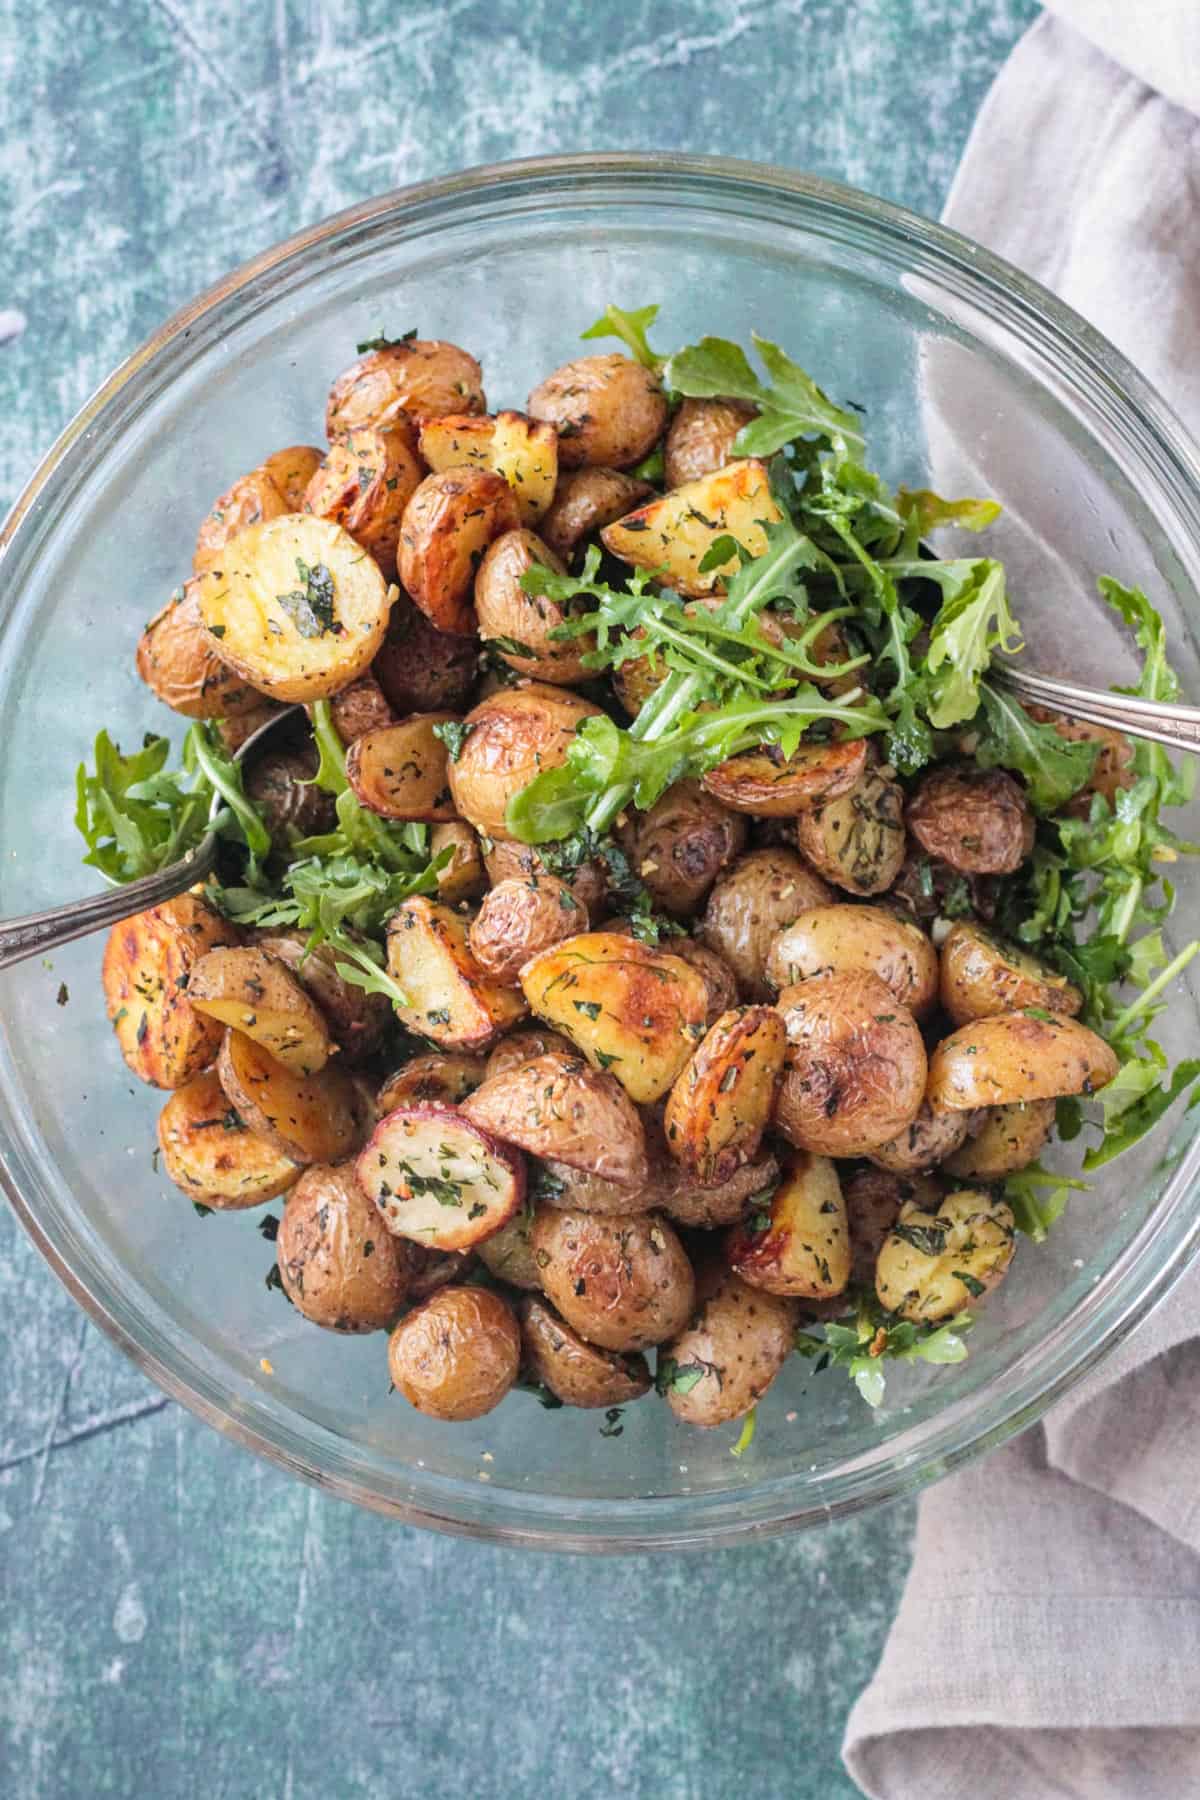 Hot roasted potatoes layered over arugula in a glass bowl.